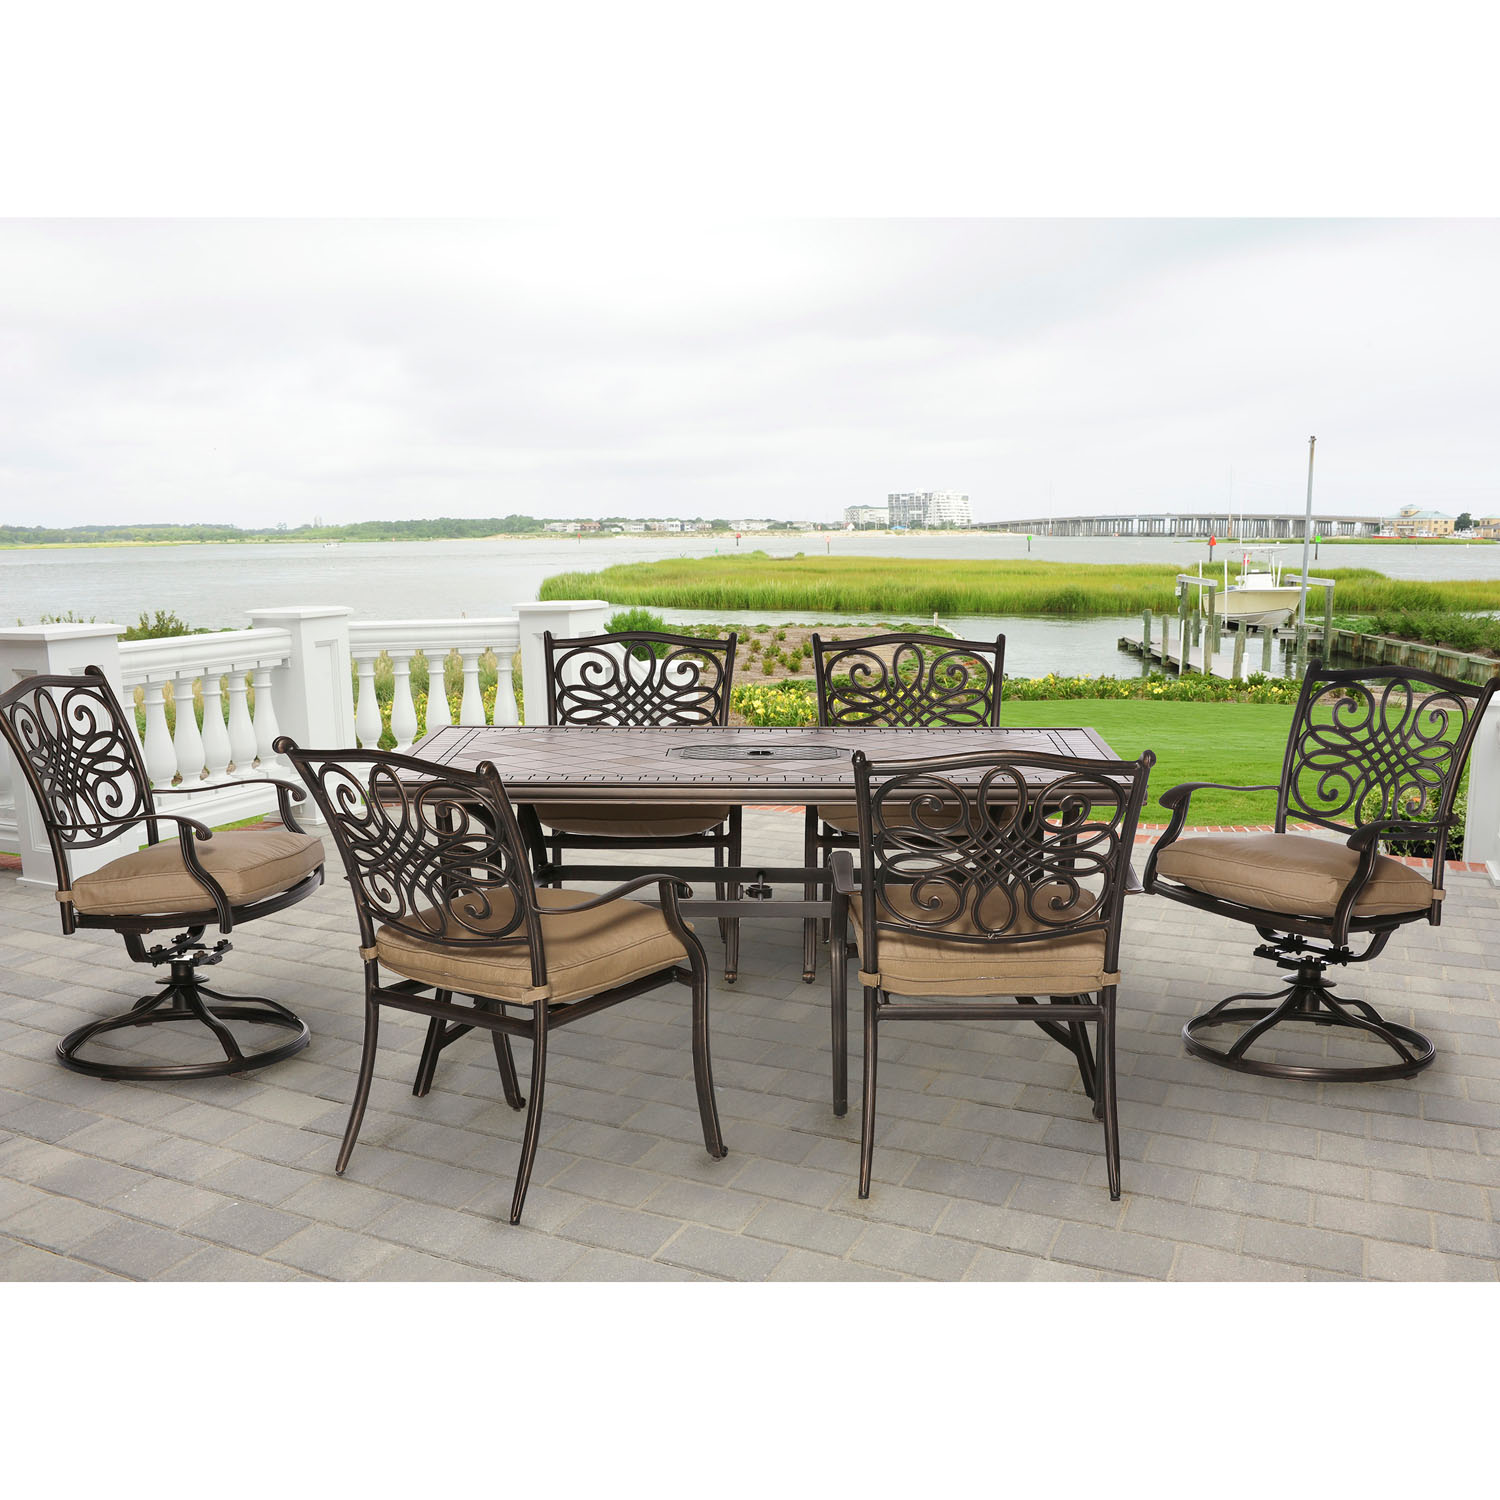 Hanover Monaco 7-Piece Rust-Free Aluminum Outdoor Patio Dining Set with Tan Cushions, 4 Dining Chairs, 2 Swivel Rockers and Porcelain Tile Rectangular Dining Table, MONDN7PCSW-2 - image 1 of 14